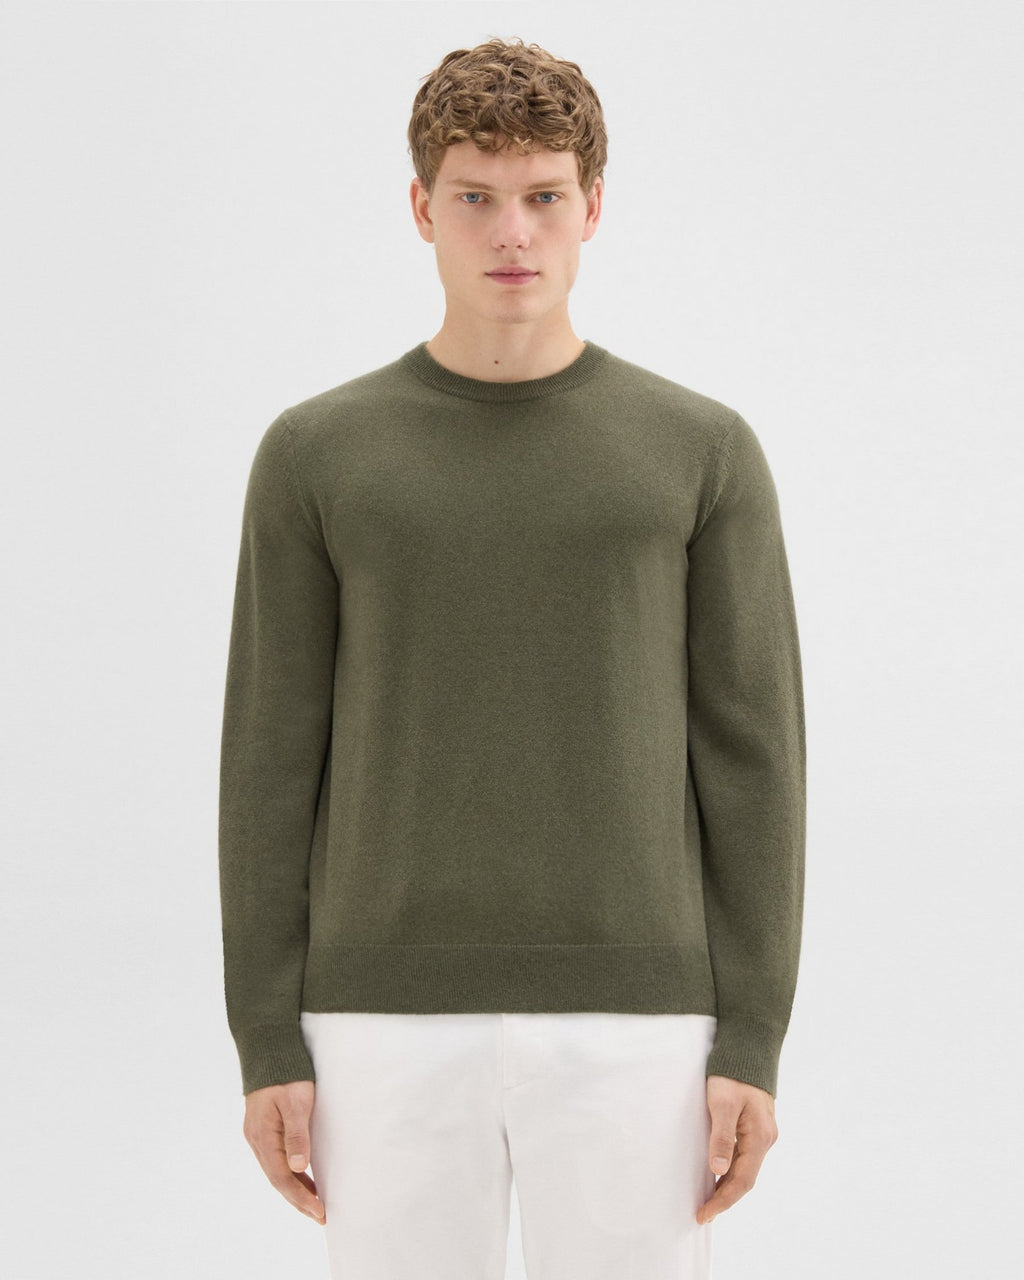 Theory Hilles Crewneck Sweater in Cashmere  - Uniform